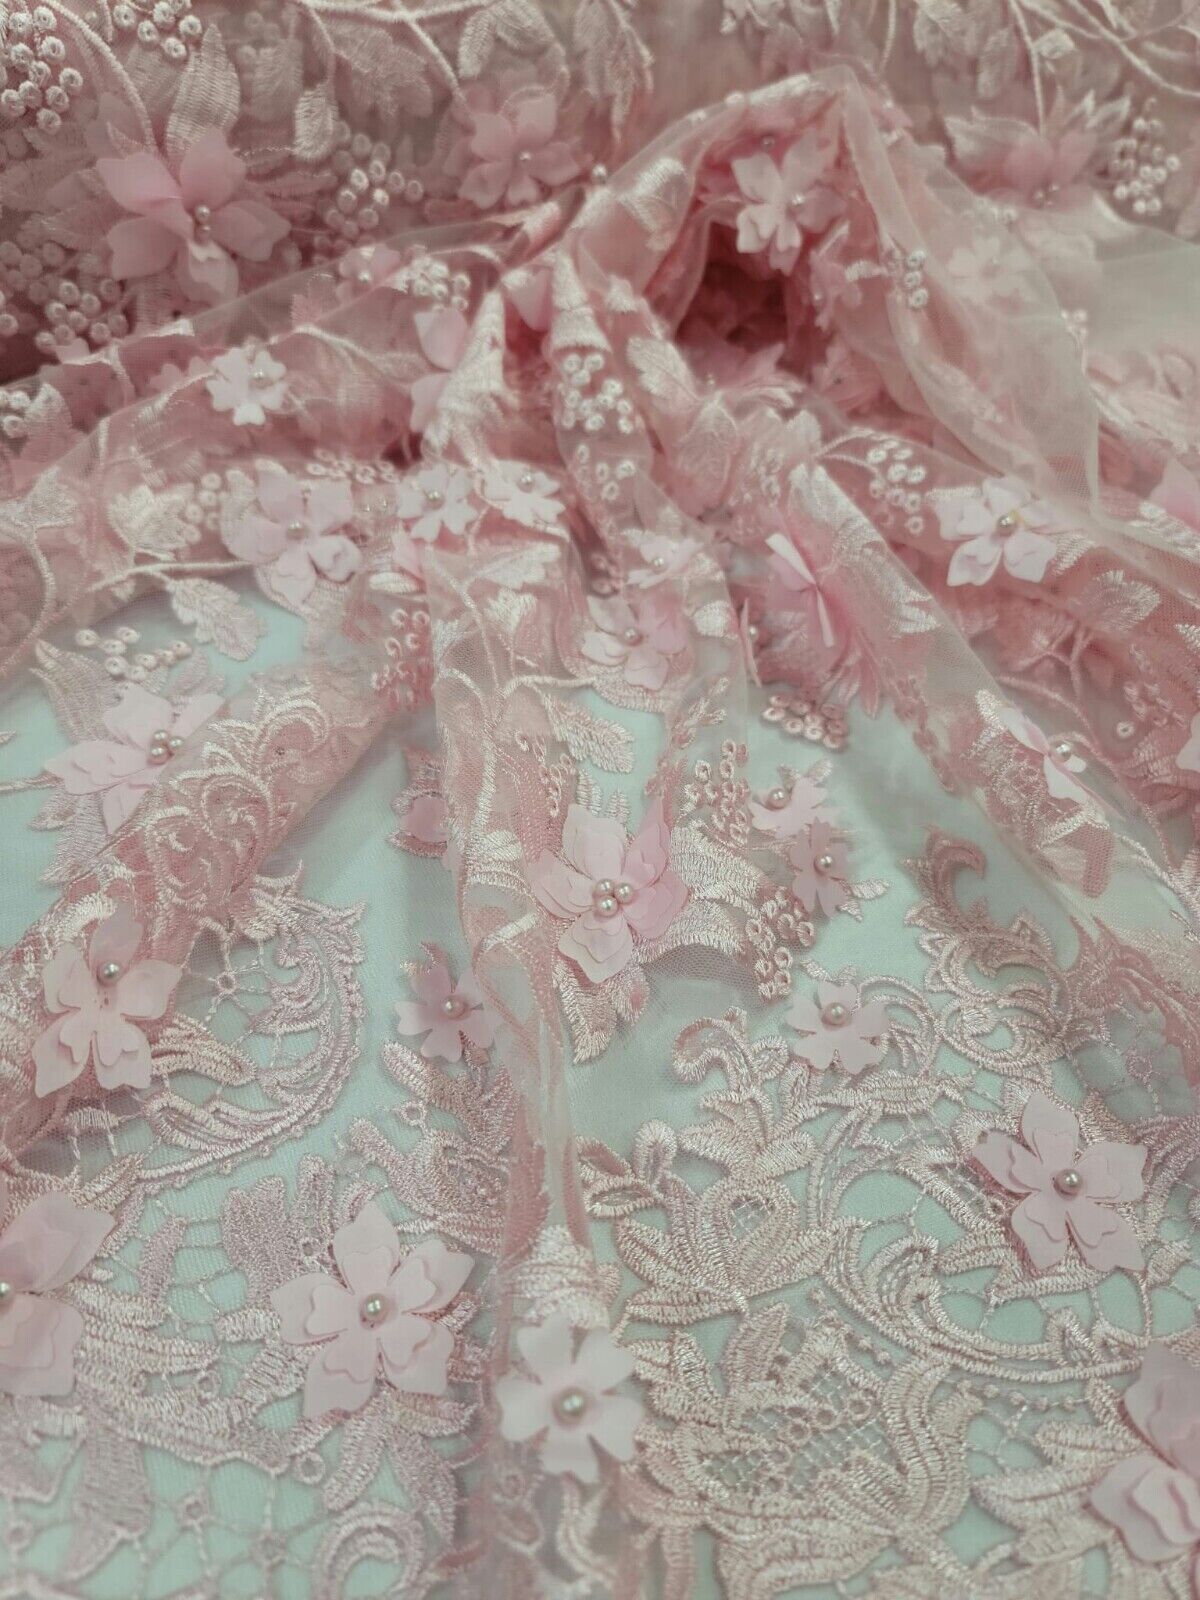 Pink Lace 3D Floral Flowers Prom Fabric - Sold by the Yard for Quinceañera Bridal